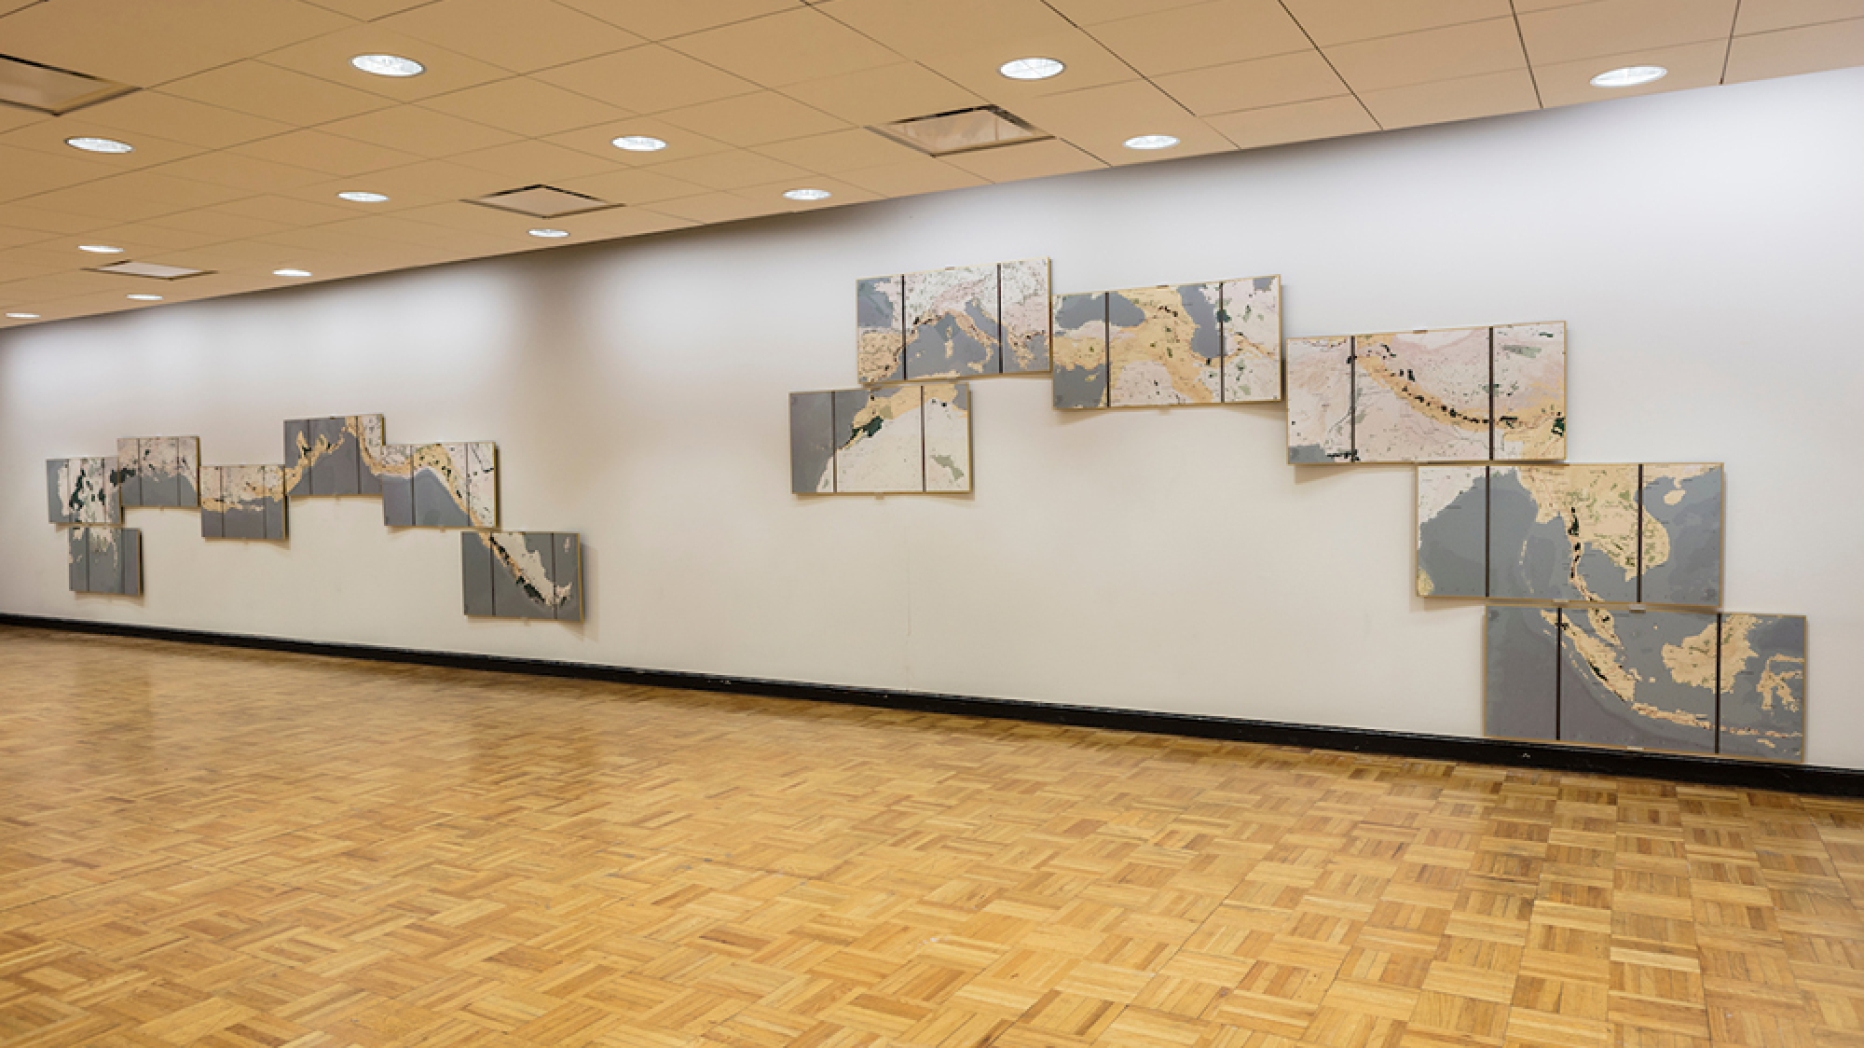 Gallery with map display